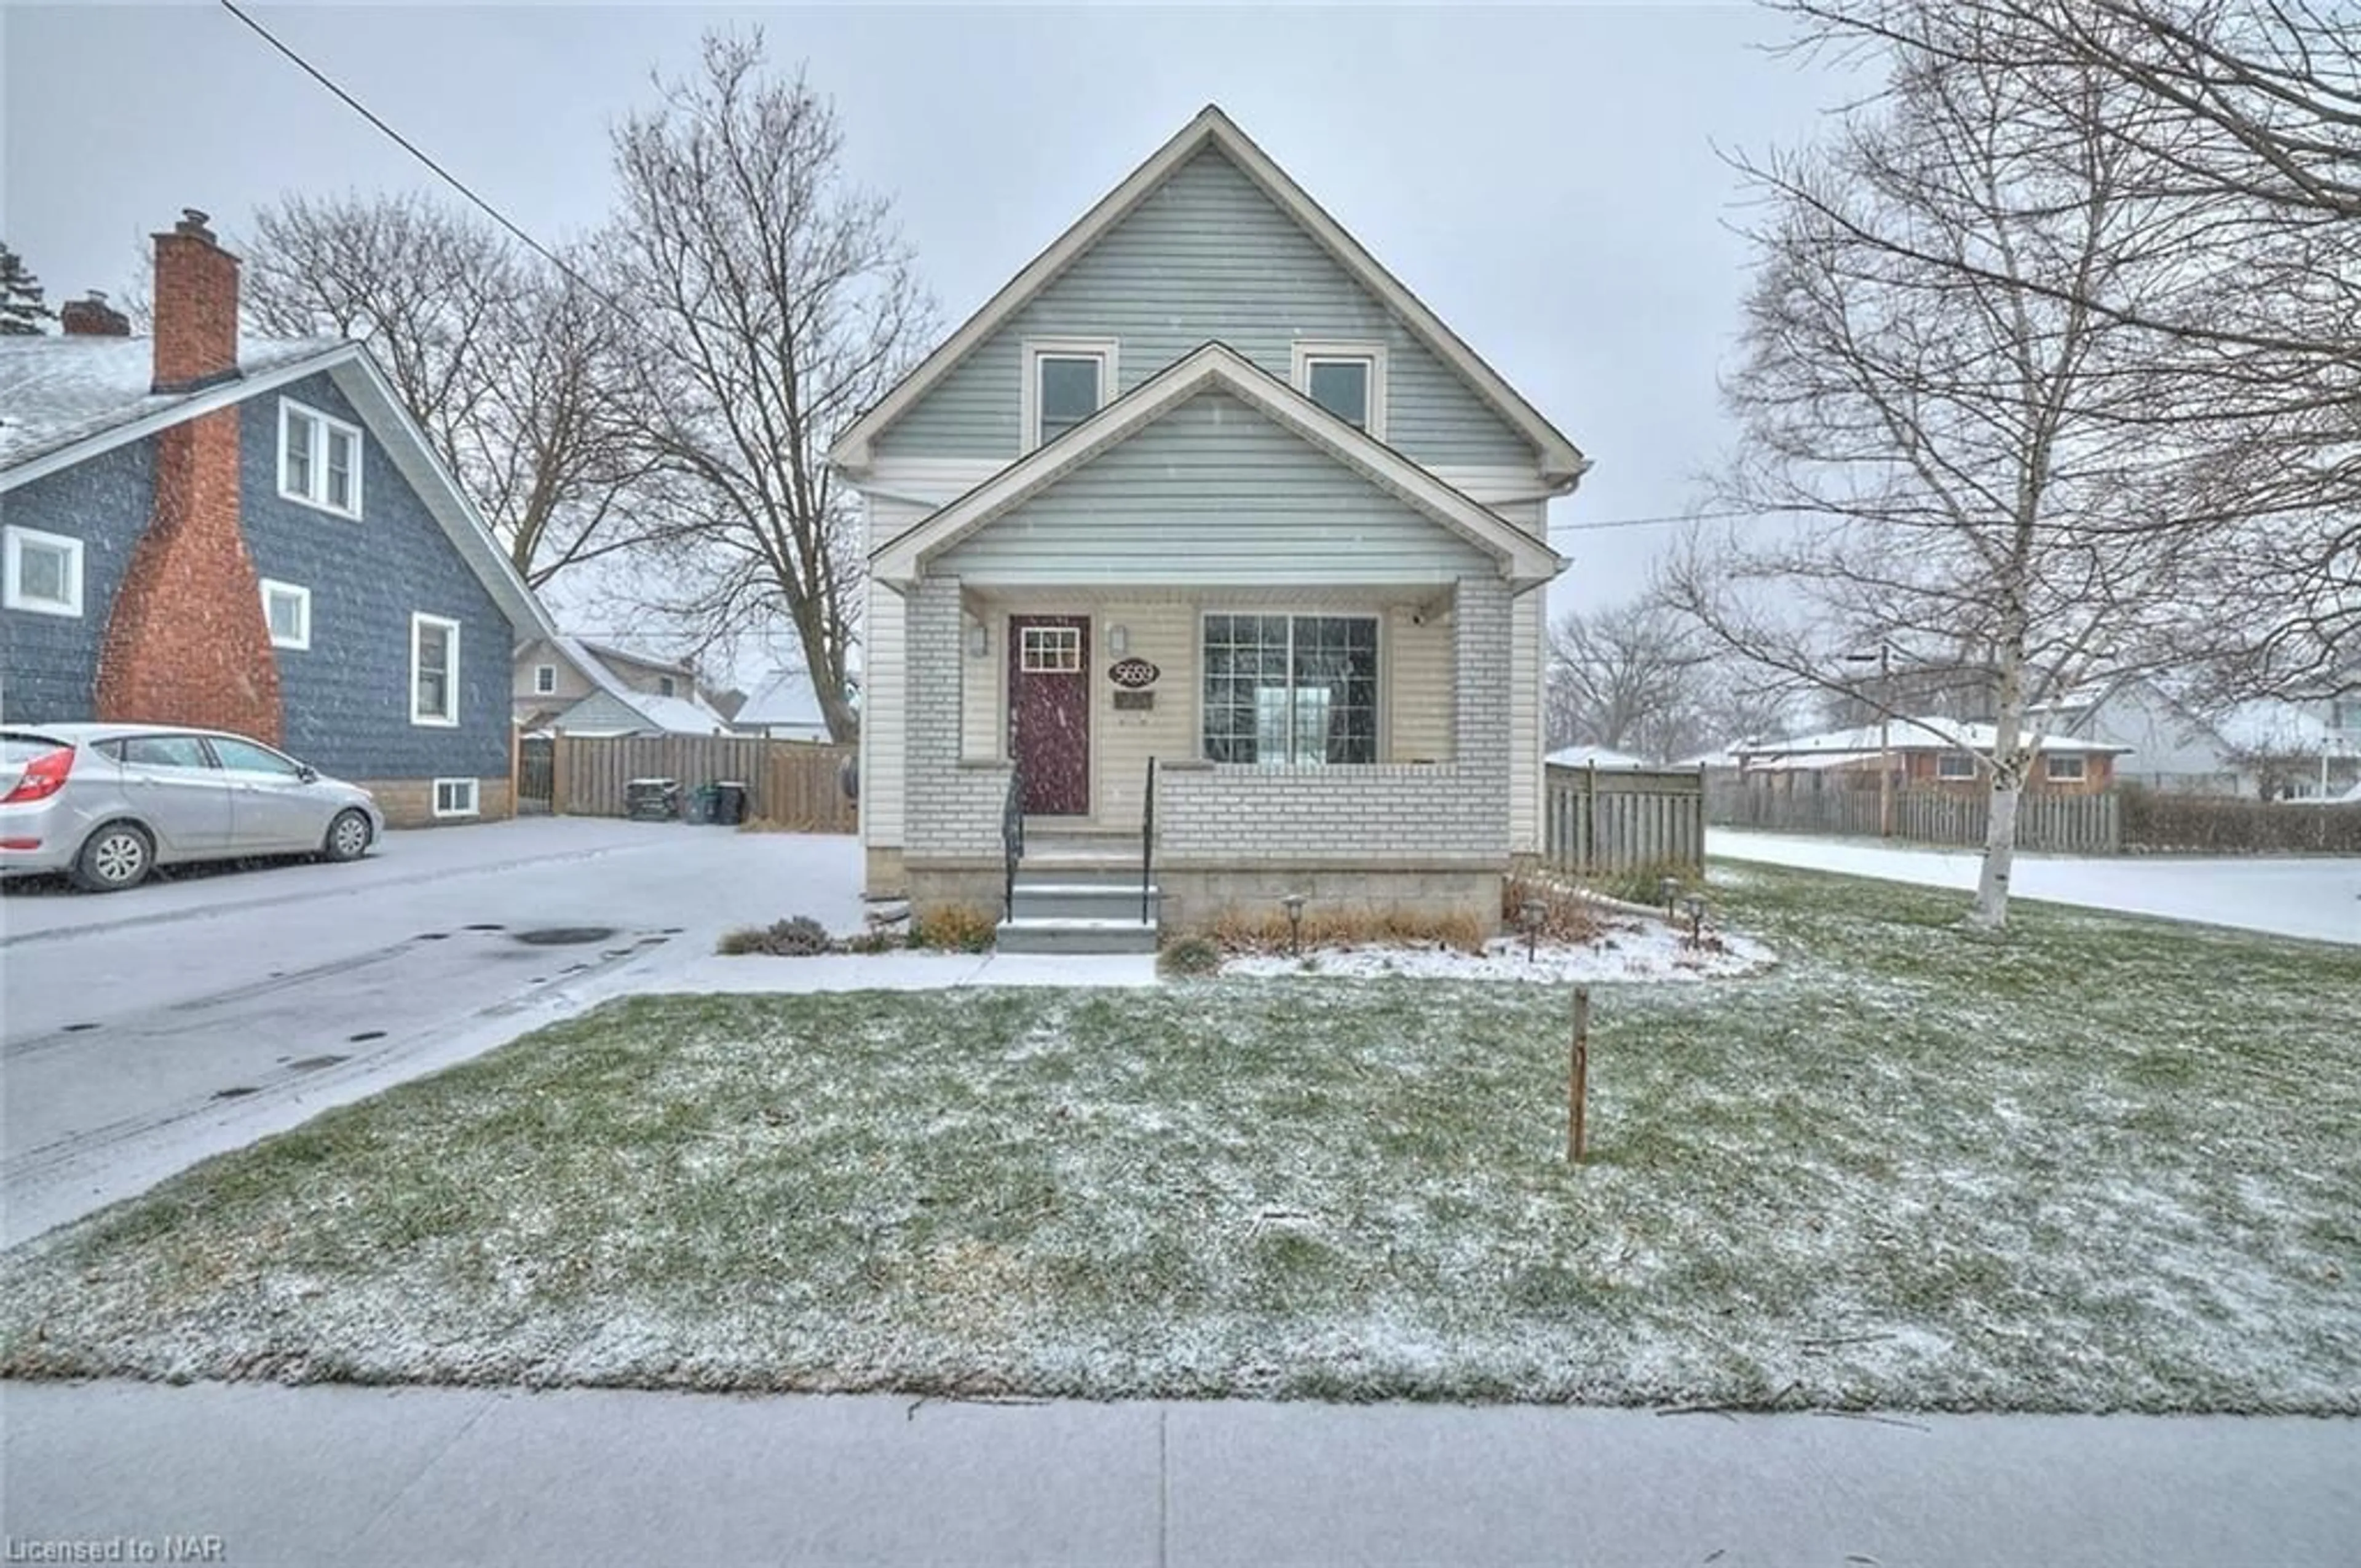 Frontside or backside of a home for 5659 Byng Ave, Niagara Falls Ontario L2G 5C9